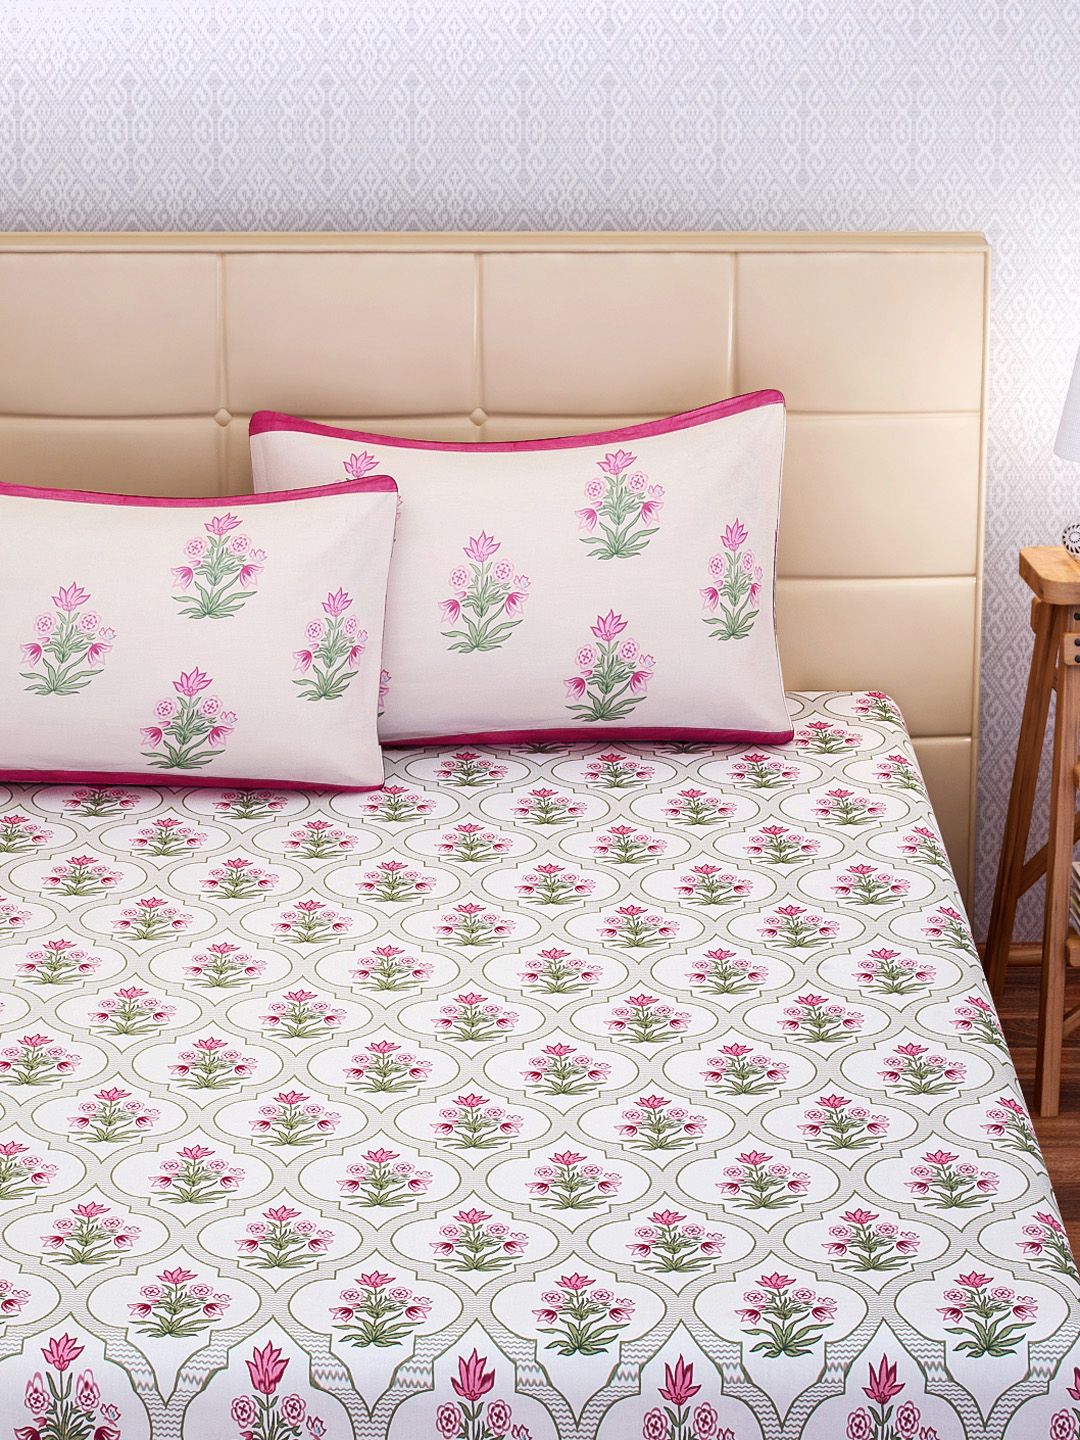 SEJ by Nisha Gupta White, Green & Pink Cotton 180 TC Double King Bedsheet with 2 Pillow Covers Price in India